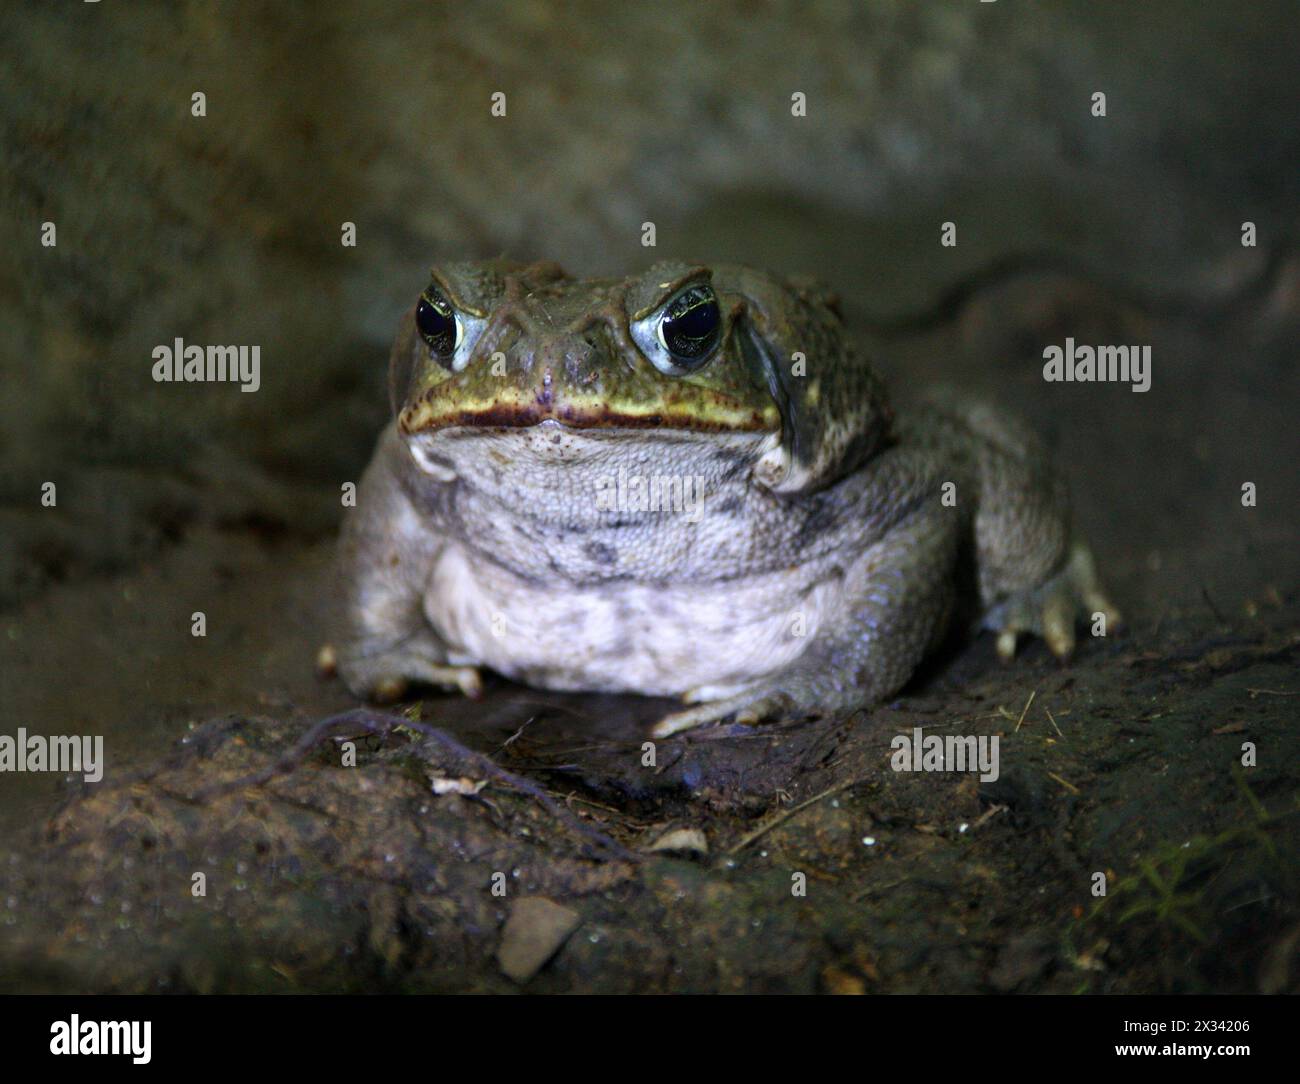 Cane Toad, Giant Neotropical Toad or Marine Toad, Rhinella marina, Bufonidae. Costa Rica. Stock Photo